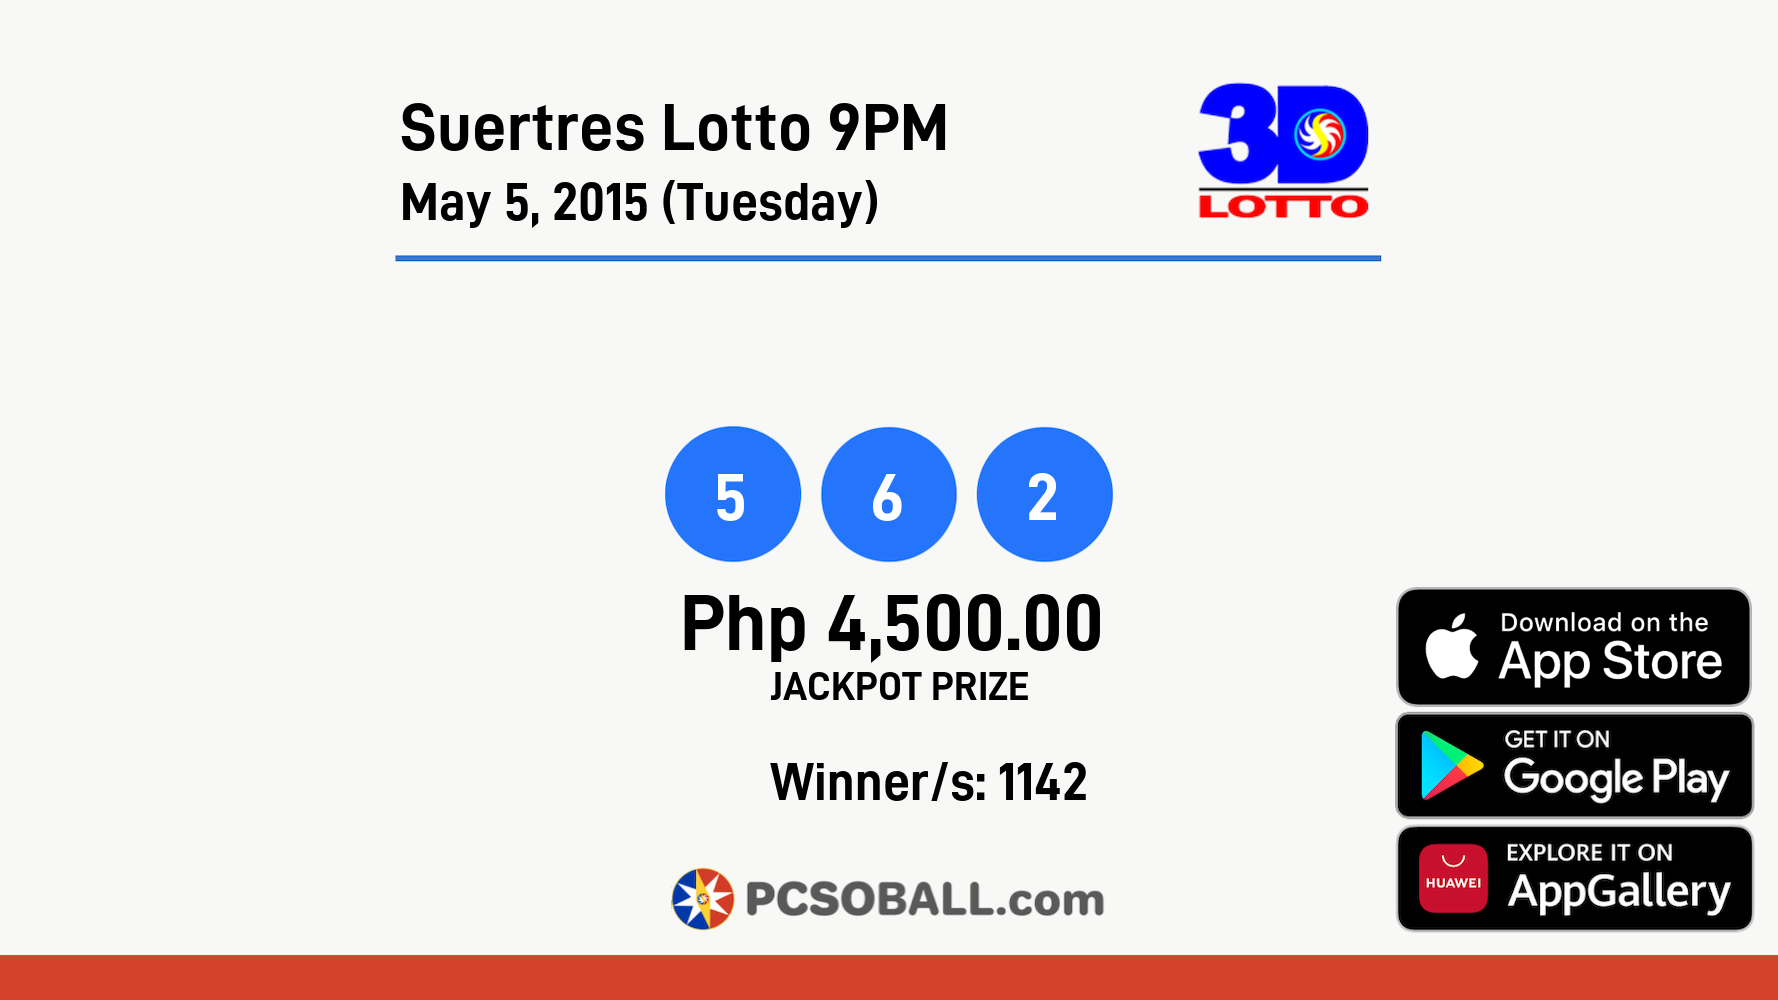 Suertres Lotto 9PM May 5, 2015 (Tuesday) Result